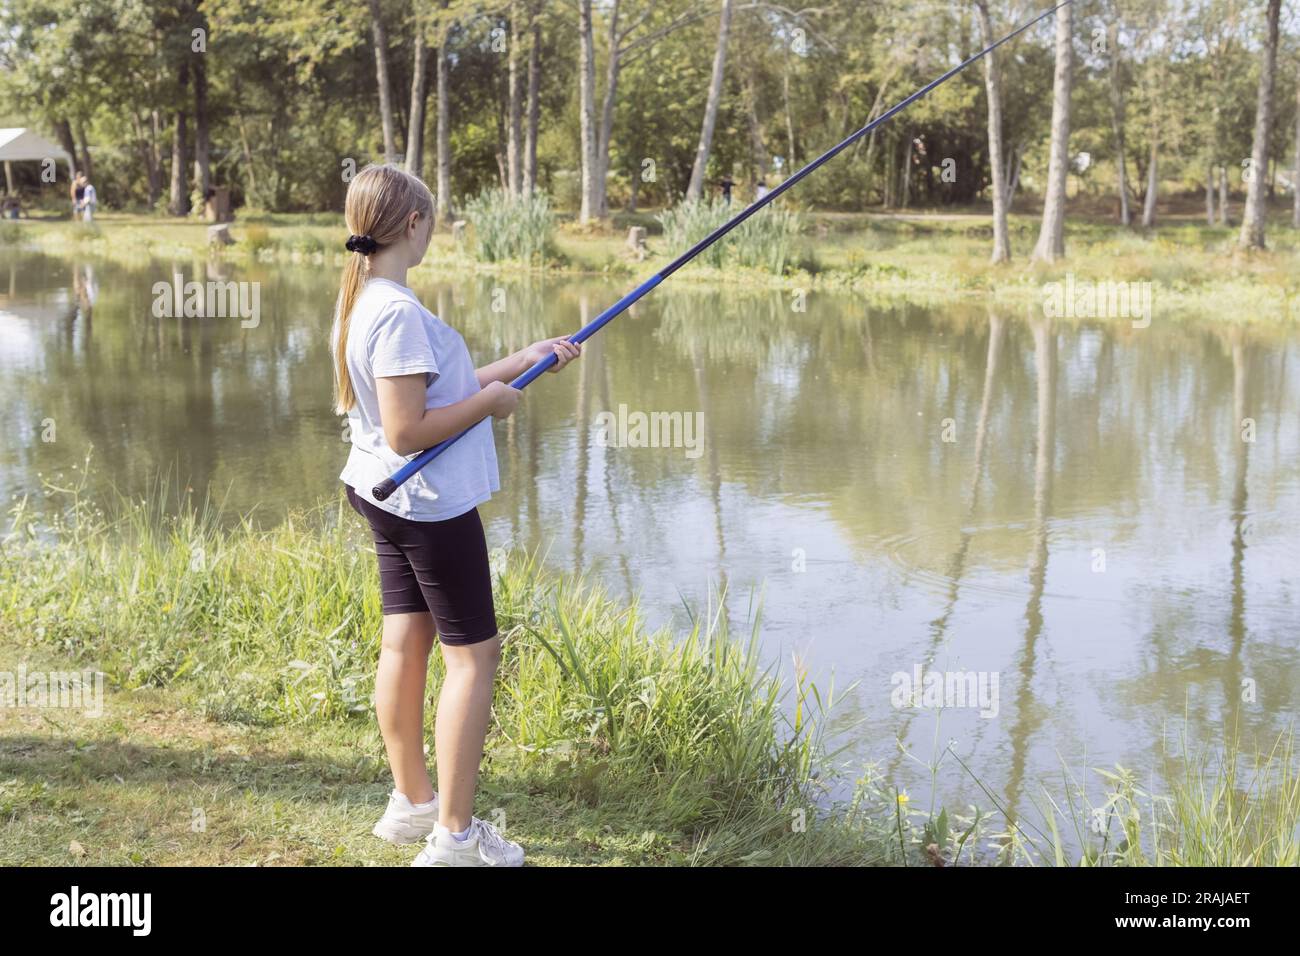 https://c8.alamy.com/comp/2RAJAET/a-teenager-girl-of-european-appearance-with-blond-hair-tied-in-a-ponytail-stands-fishing-at-a-stake-holds-a-fishing-rod-in-her-hands-dressed-in-bla-2RAJAET.jpg